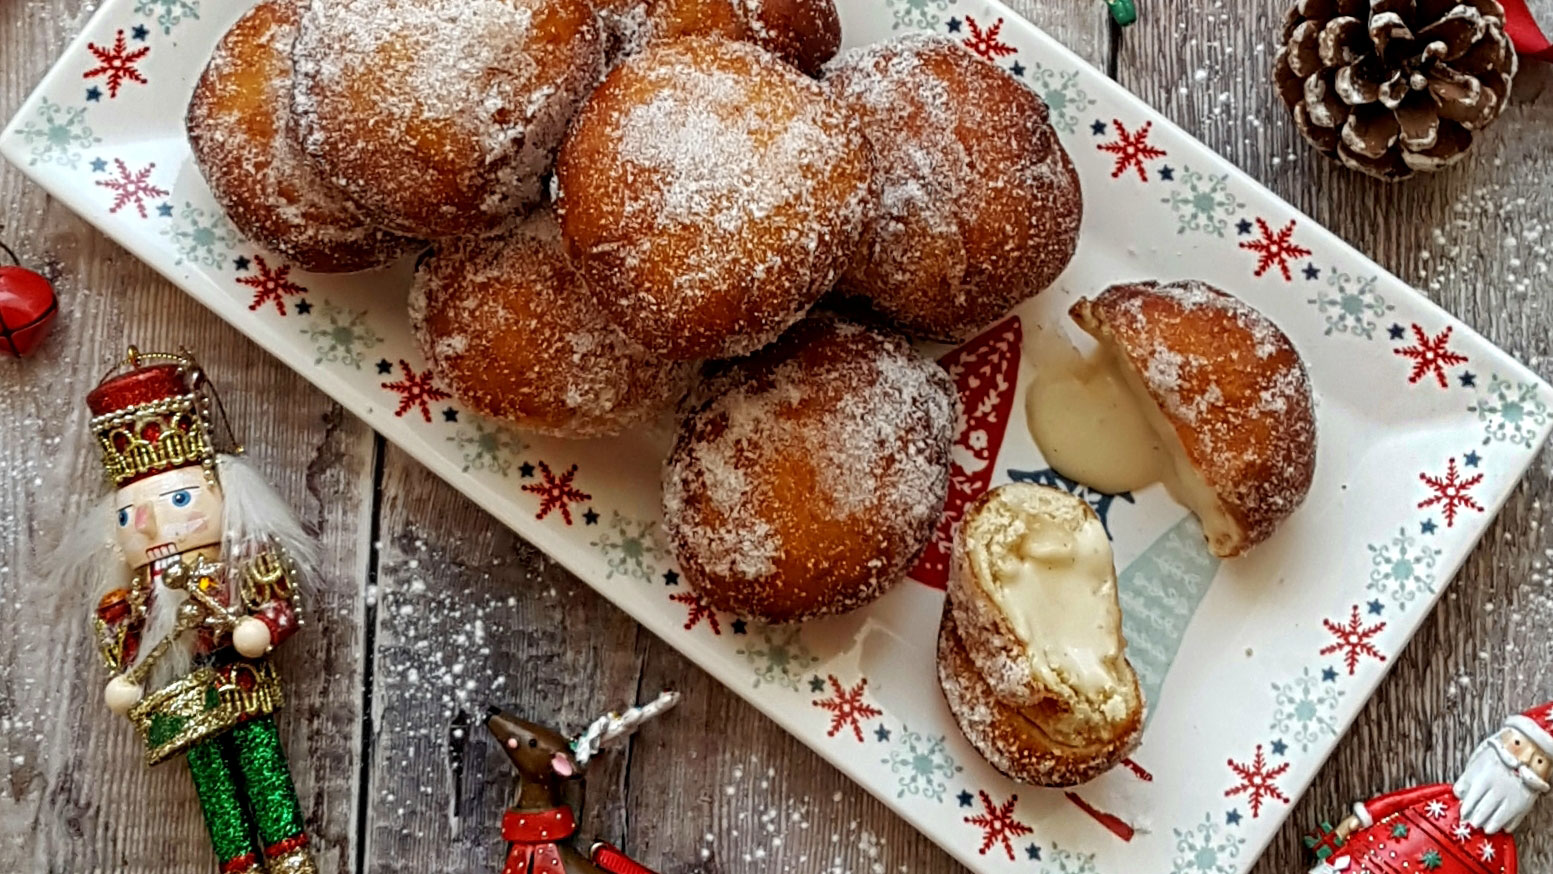 ~Gingerbread Doughnuts dusted with sugar served on a festive plate